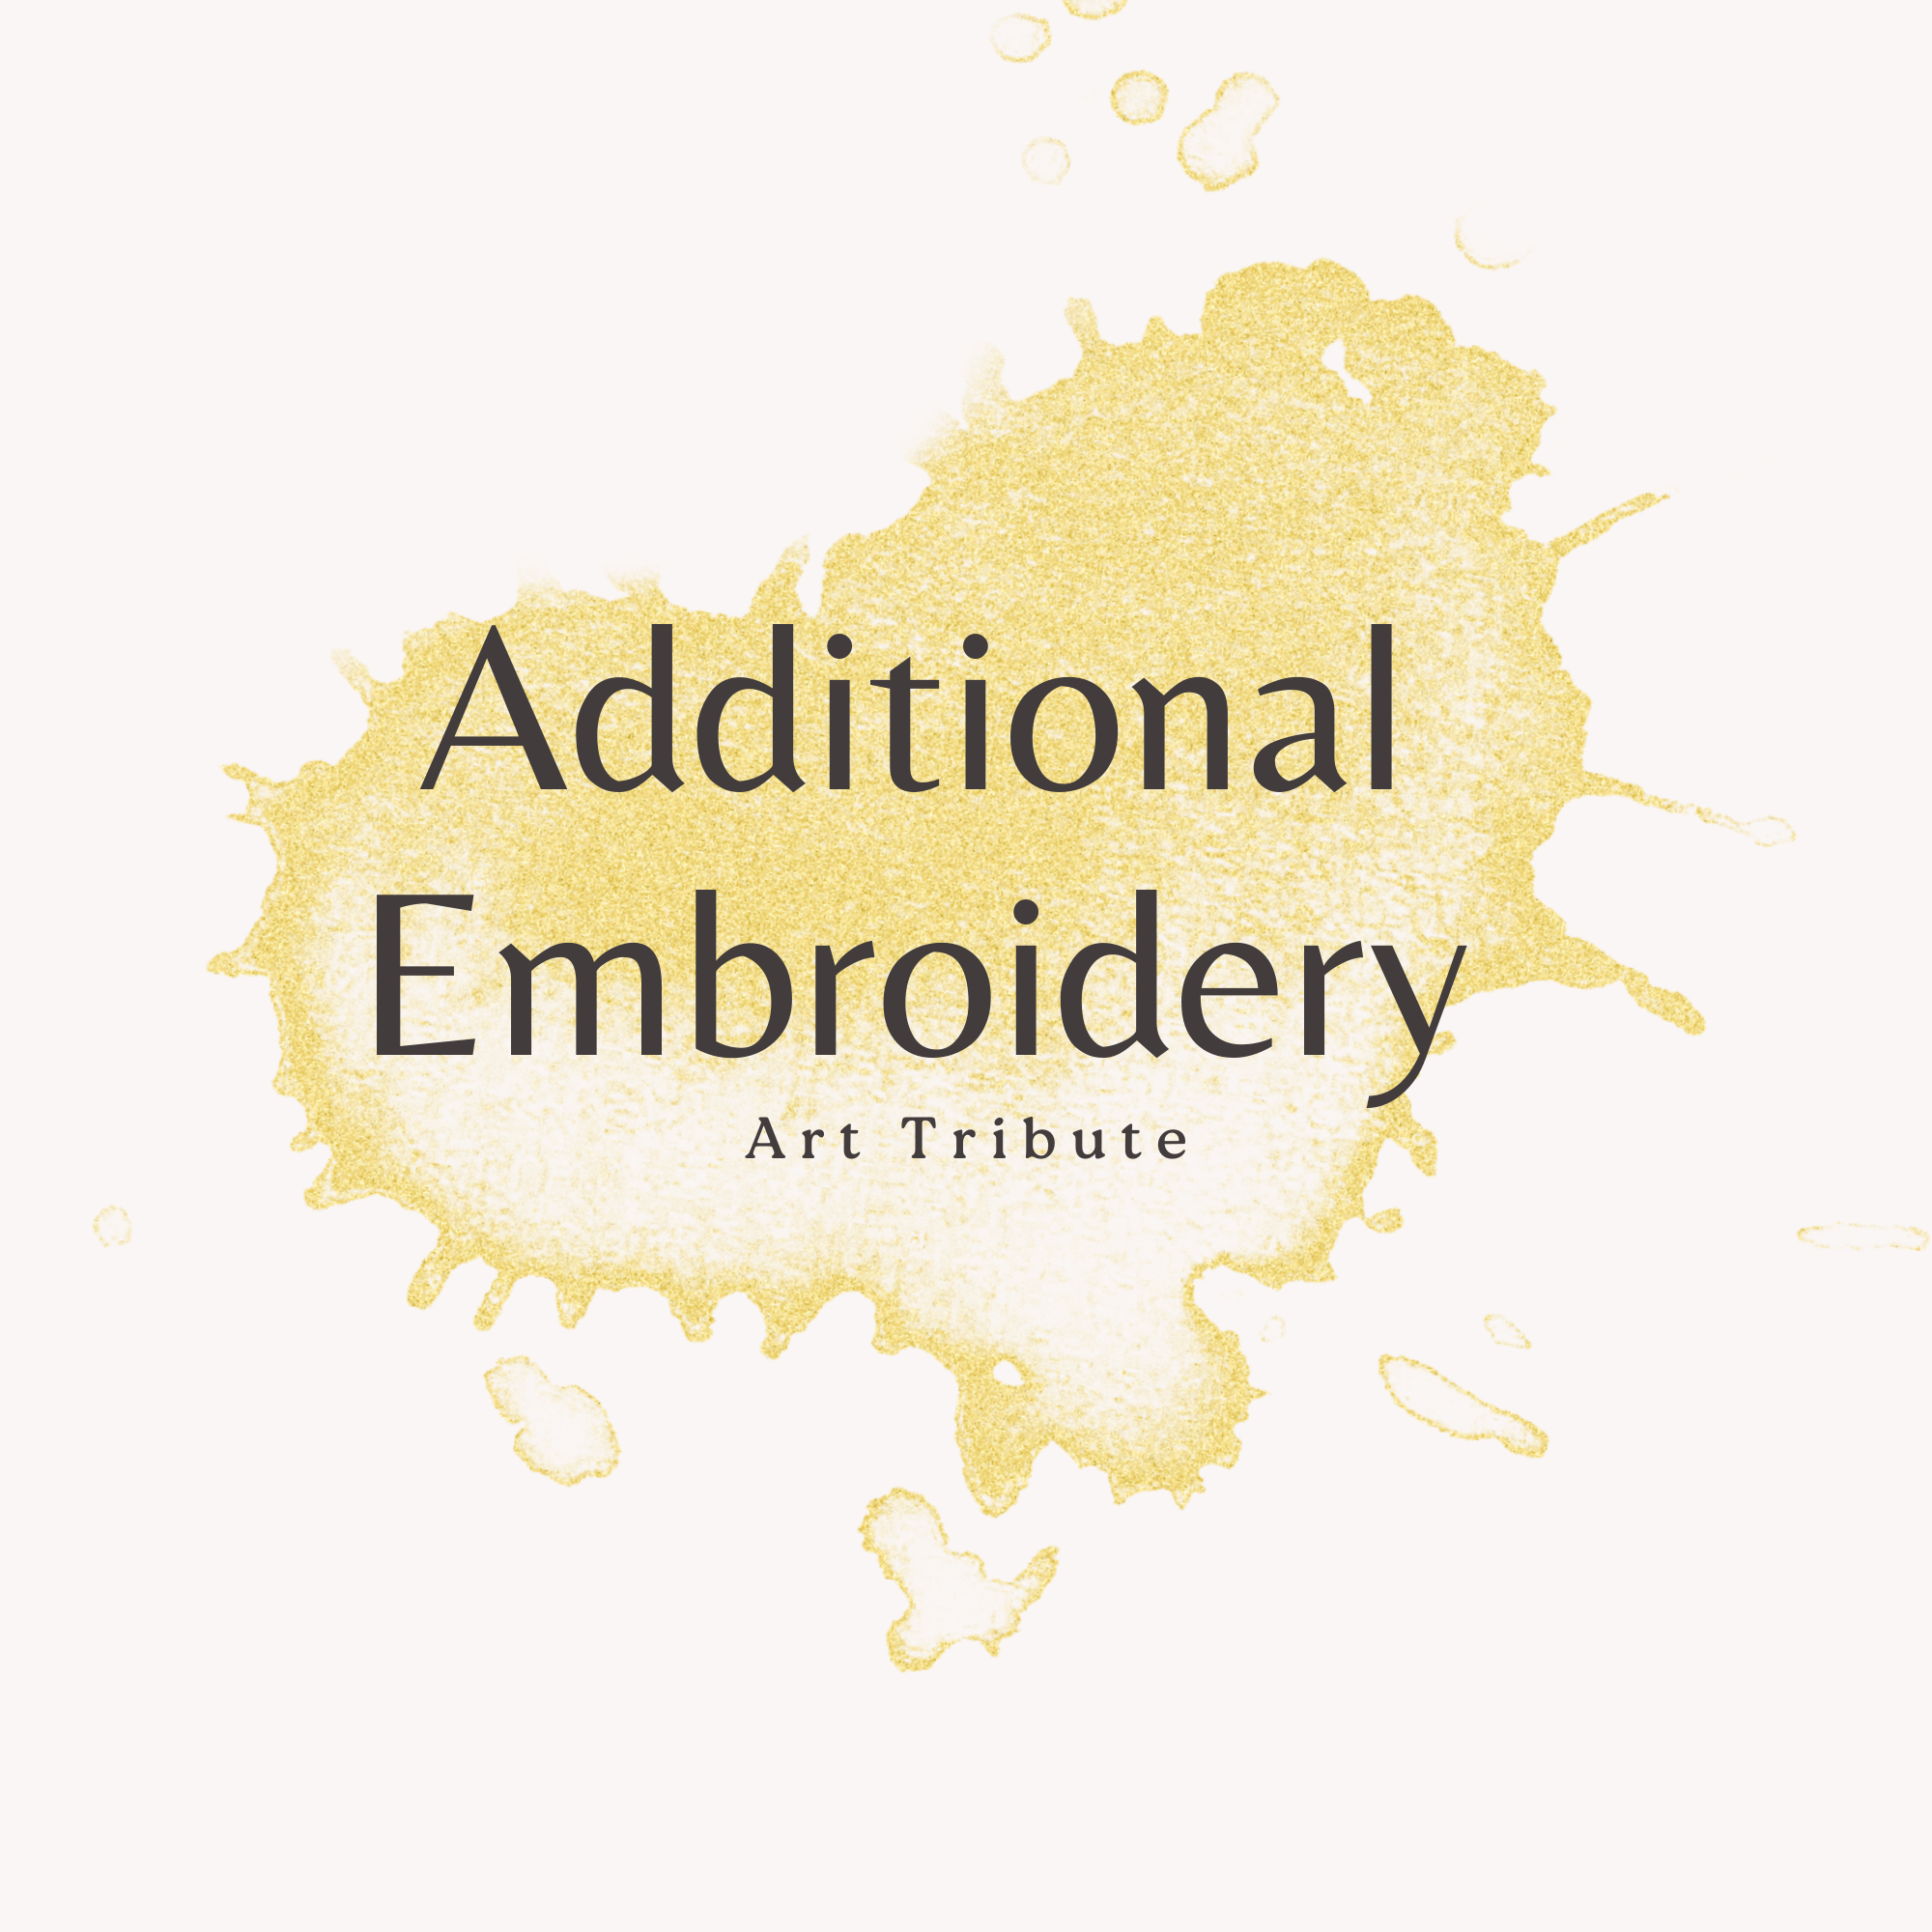 Additional Embroidery